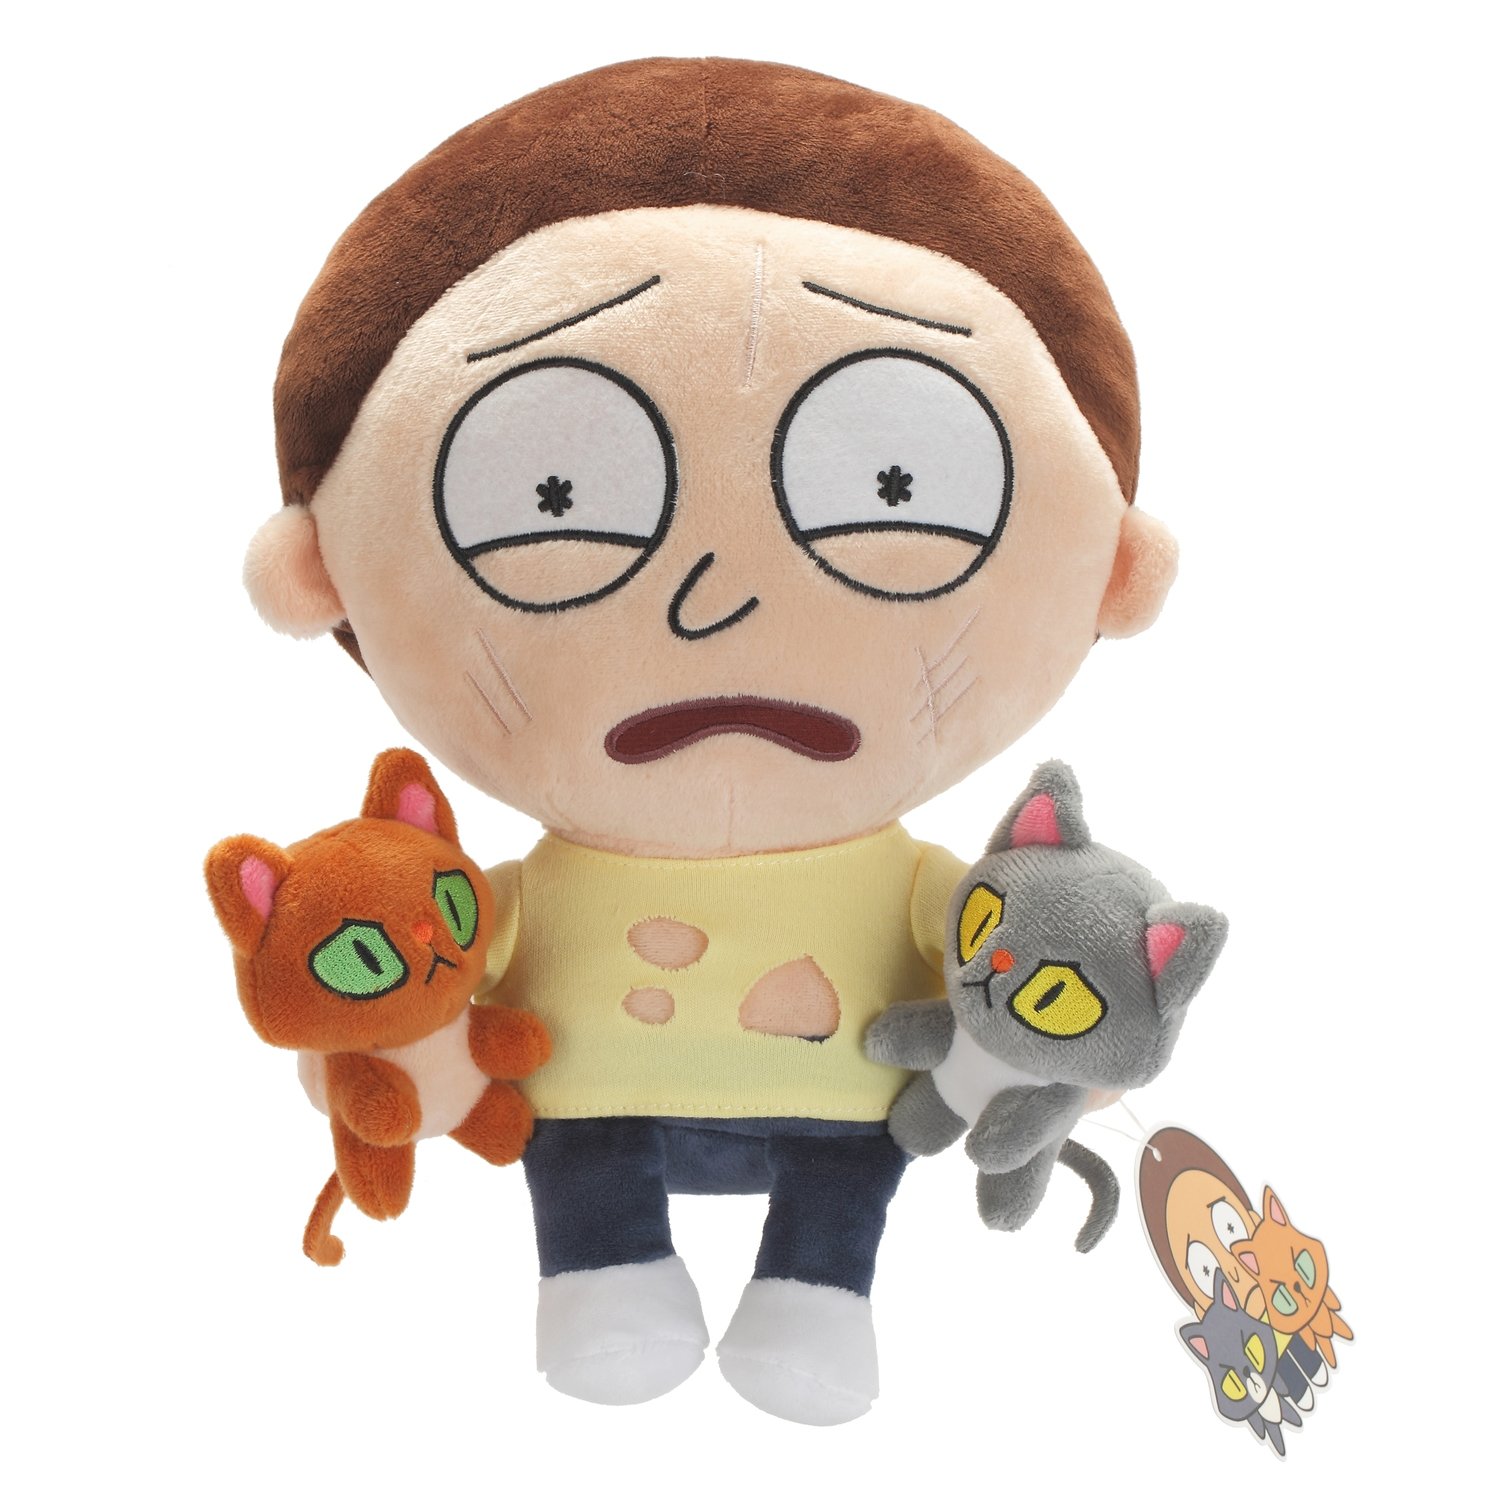 Rick and Morty: Two Cat Morty Plush